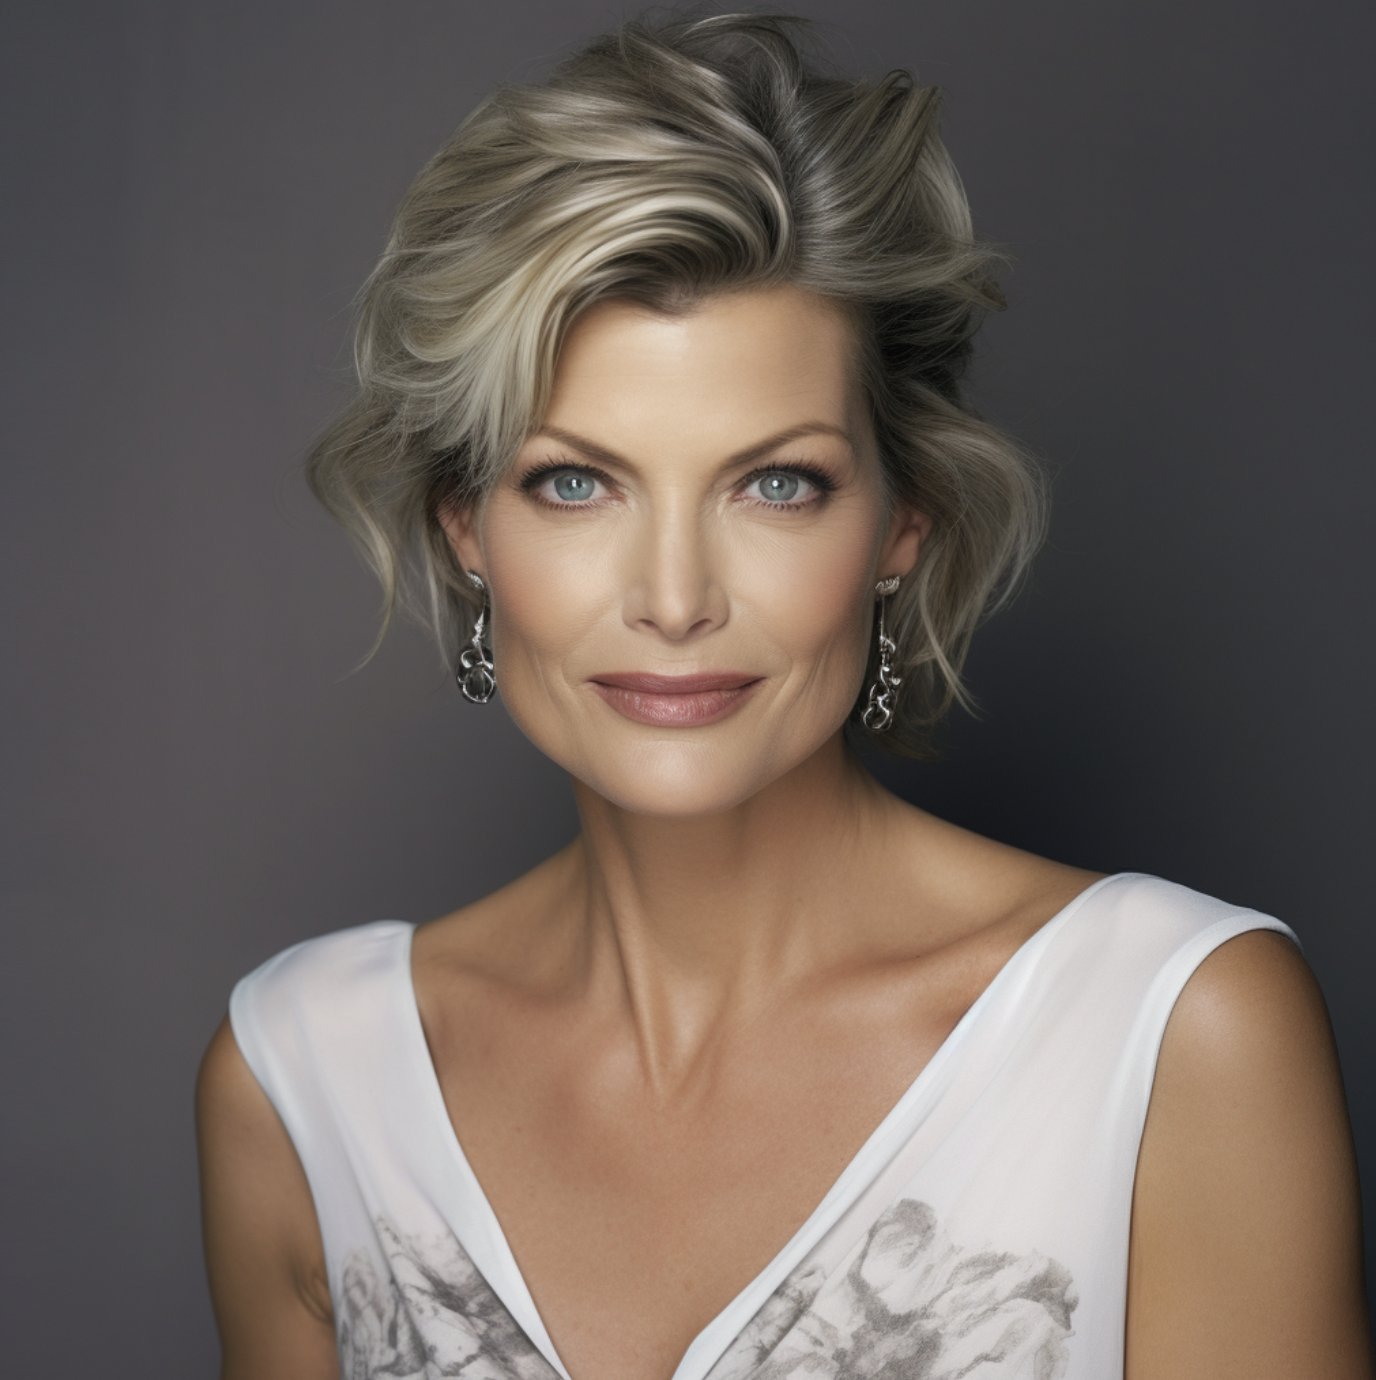 How Linda Evangelista would look today according to an AI-rendered image | Source: Midjourney